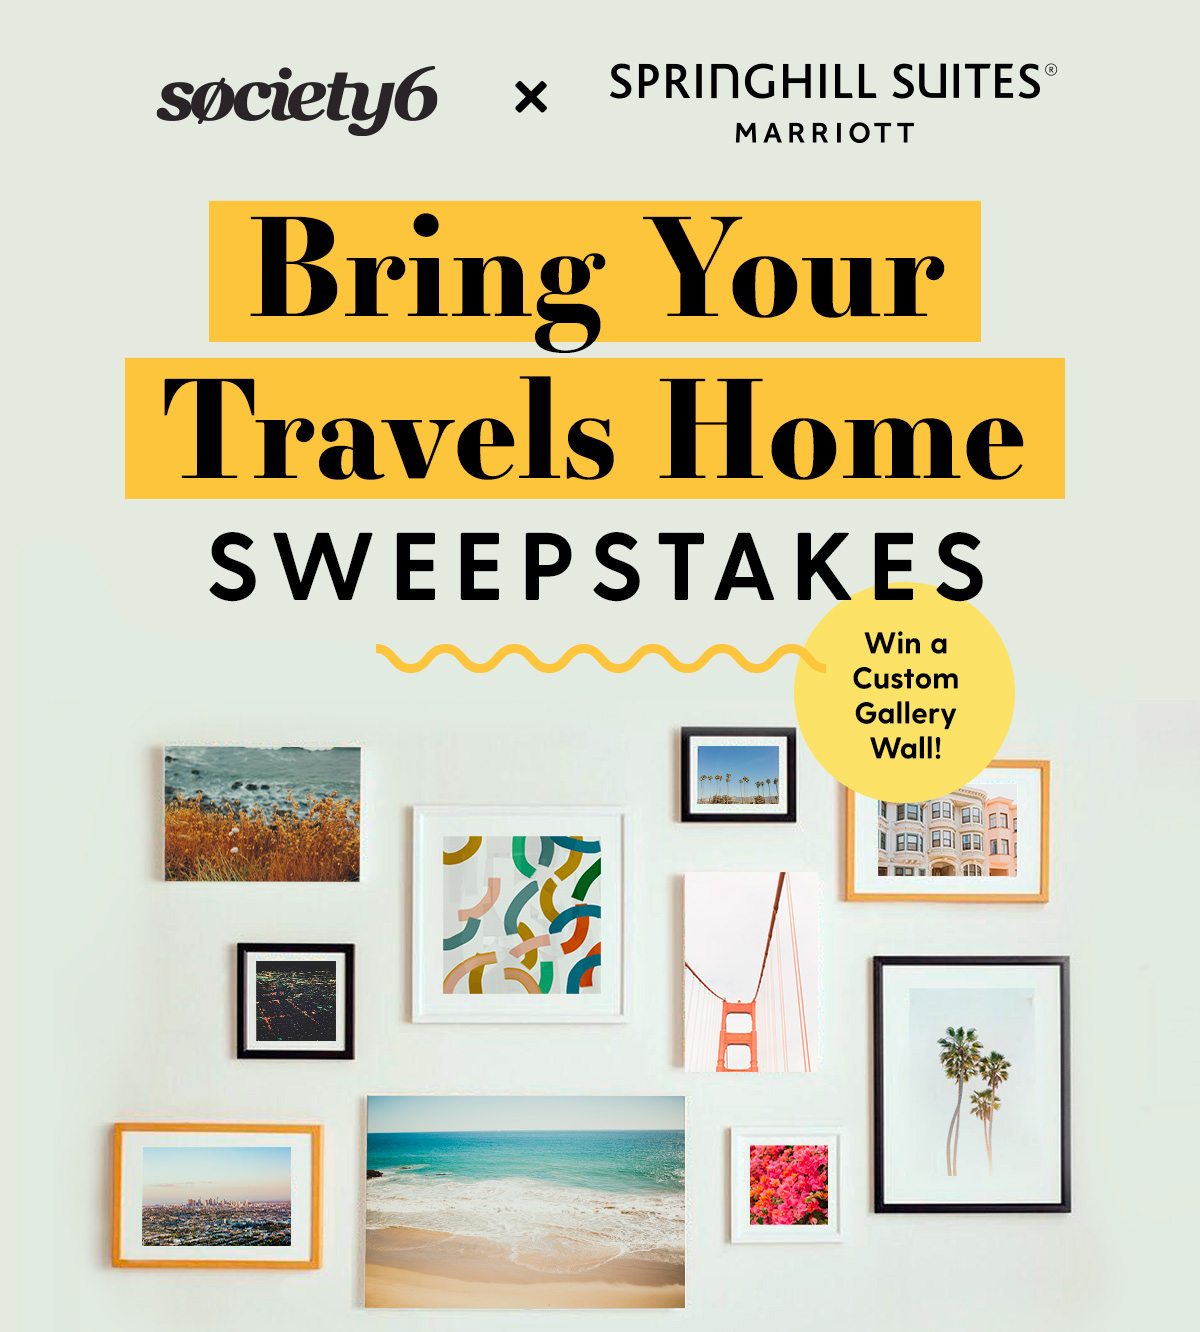 Society6 x SpringHill Suites by Marriott. Bring Your Travels Home Sweepstakes. Win a Custom Gallery Wall!